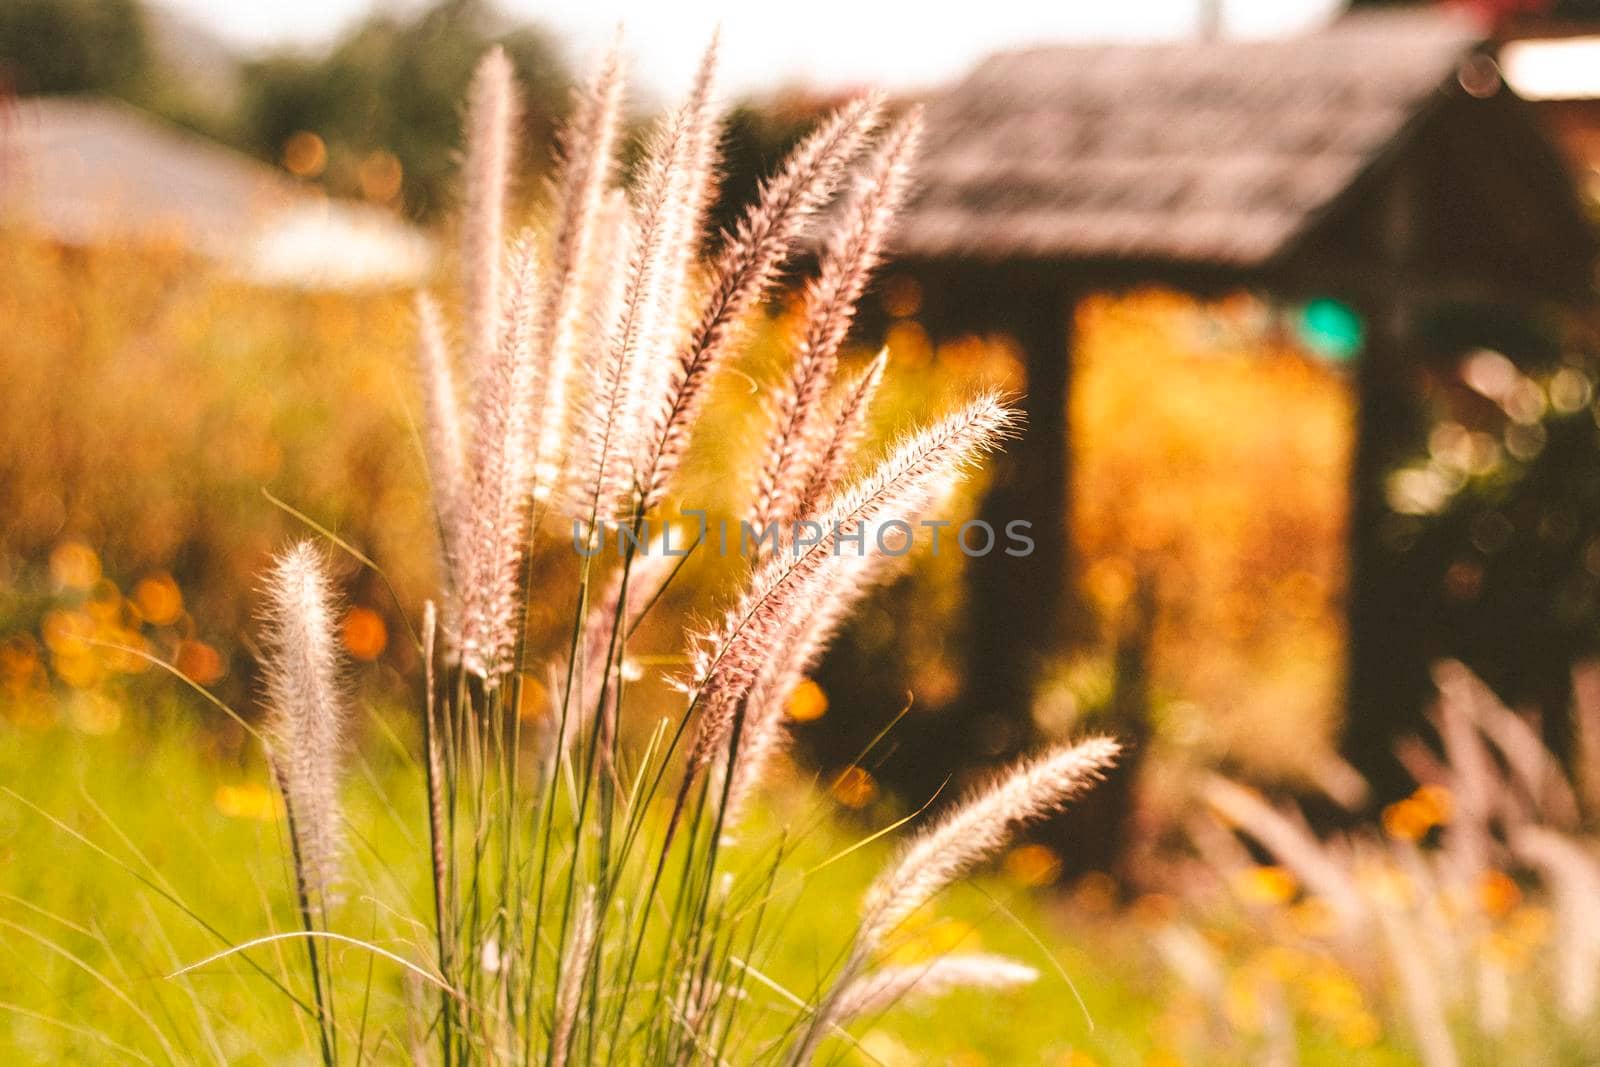 grasses blowing in wind on  motion blur yellow field  background .farmland background for holiday